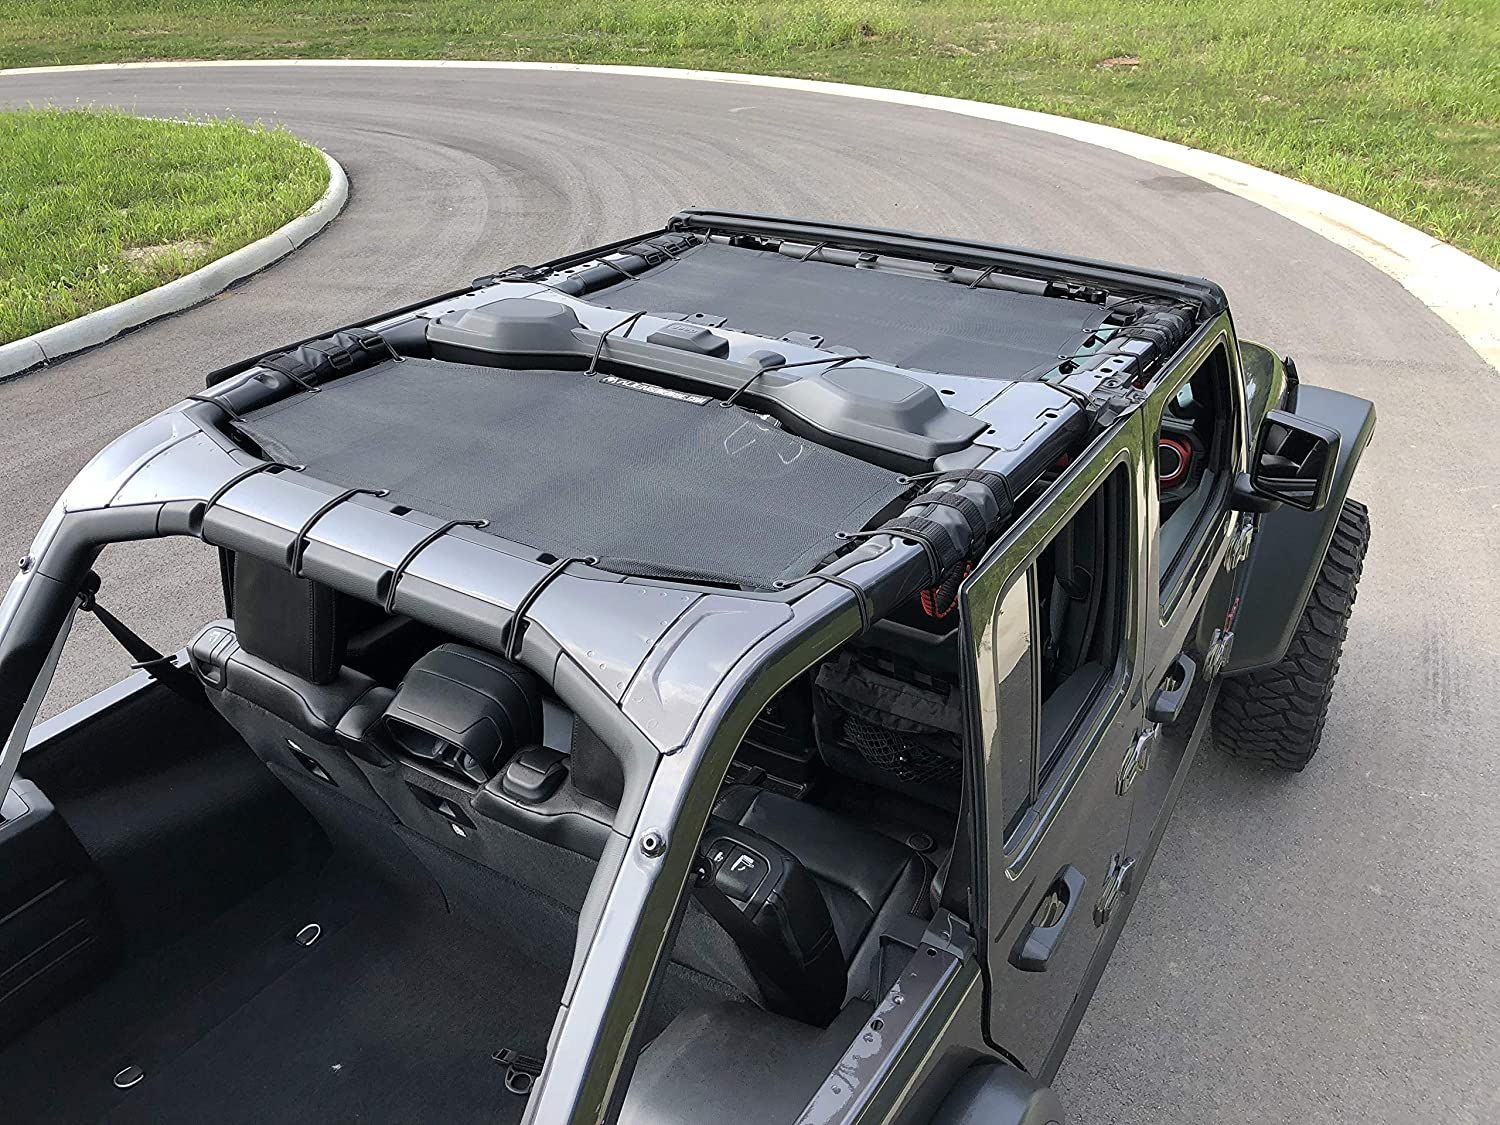 2007-2017 ALIEN SUNSHADE Jeep Wrangler 2-Piece Mesh Shade Top Cover with 10 Year Warranty Provides UV Protection for Front And Rear Passengers 4-Door JKU Green 